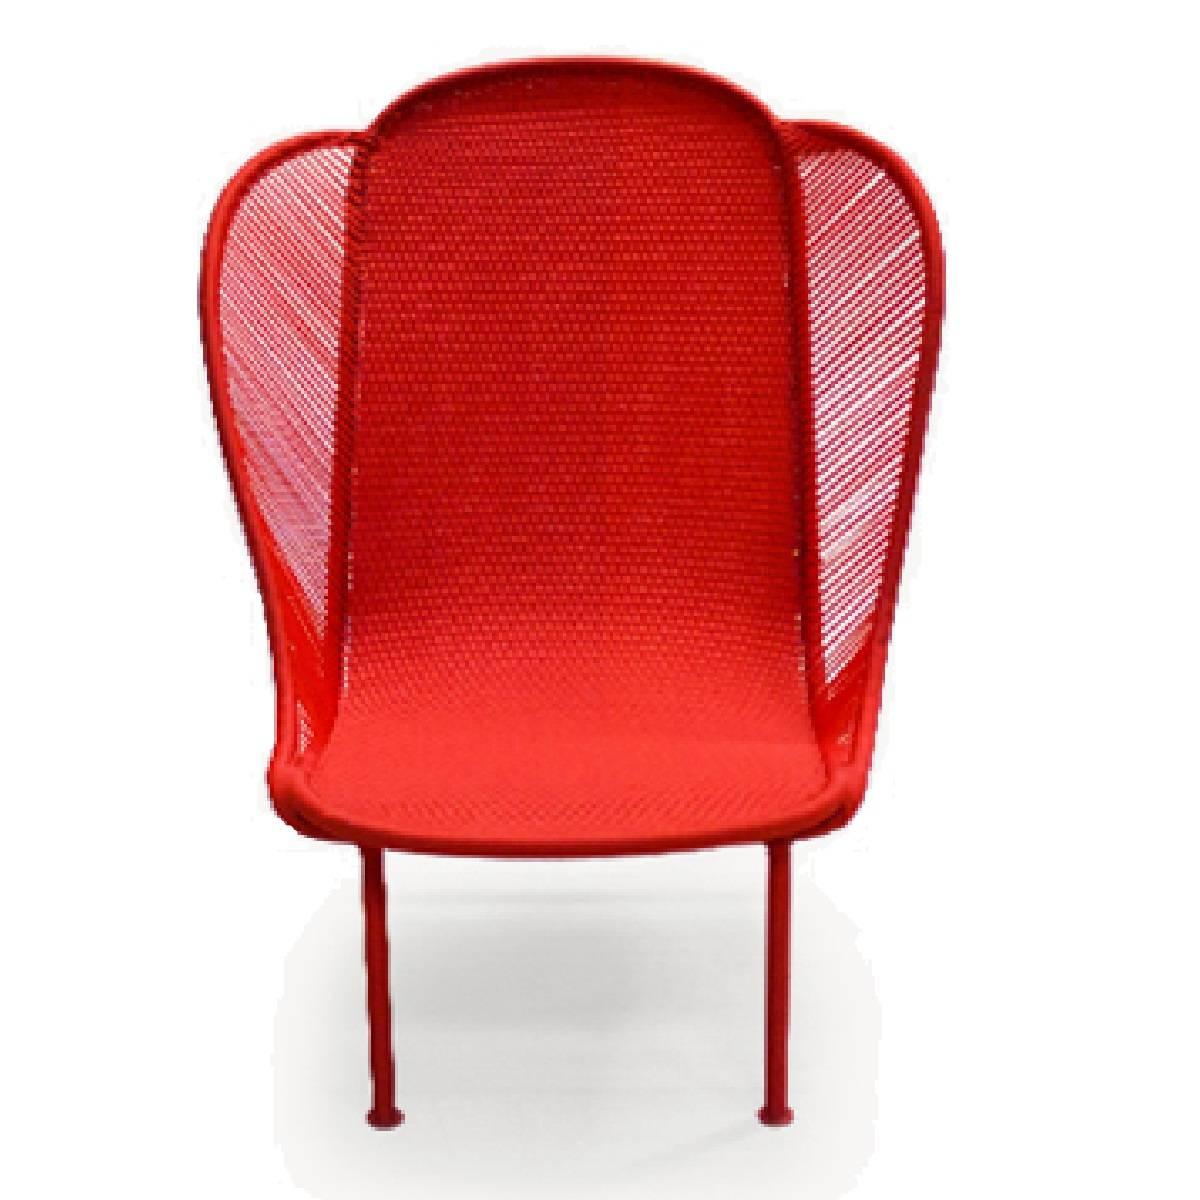 Imba is part of the M’Afrique collection by Italian furniture manufacturer Moroso. Imba was conceived by the designer Federica Capitani and produced by African Craft weavers using the yarn of fishing nets. 

The designs are all different and